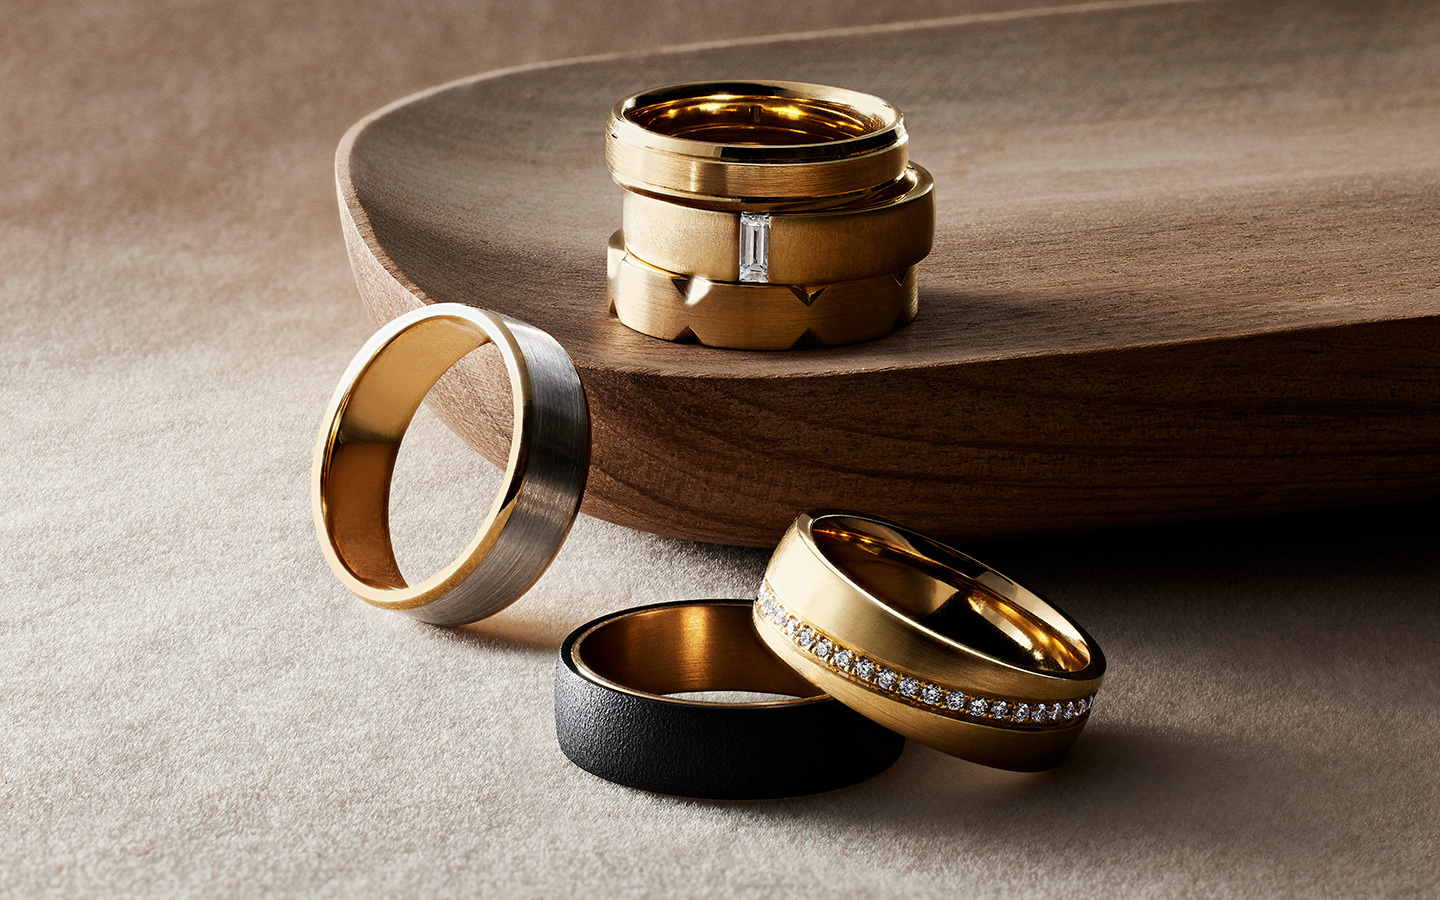 Men's wedding and engagement rings in gold and alternative metals